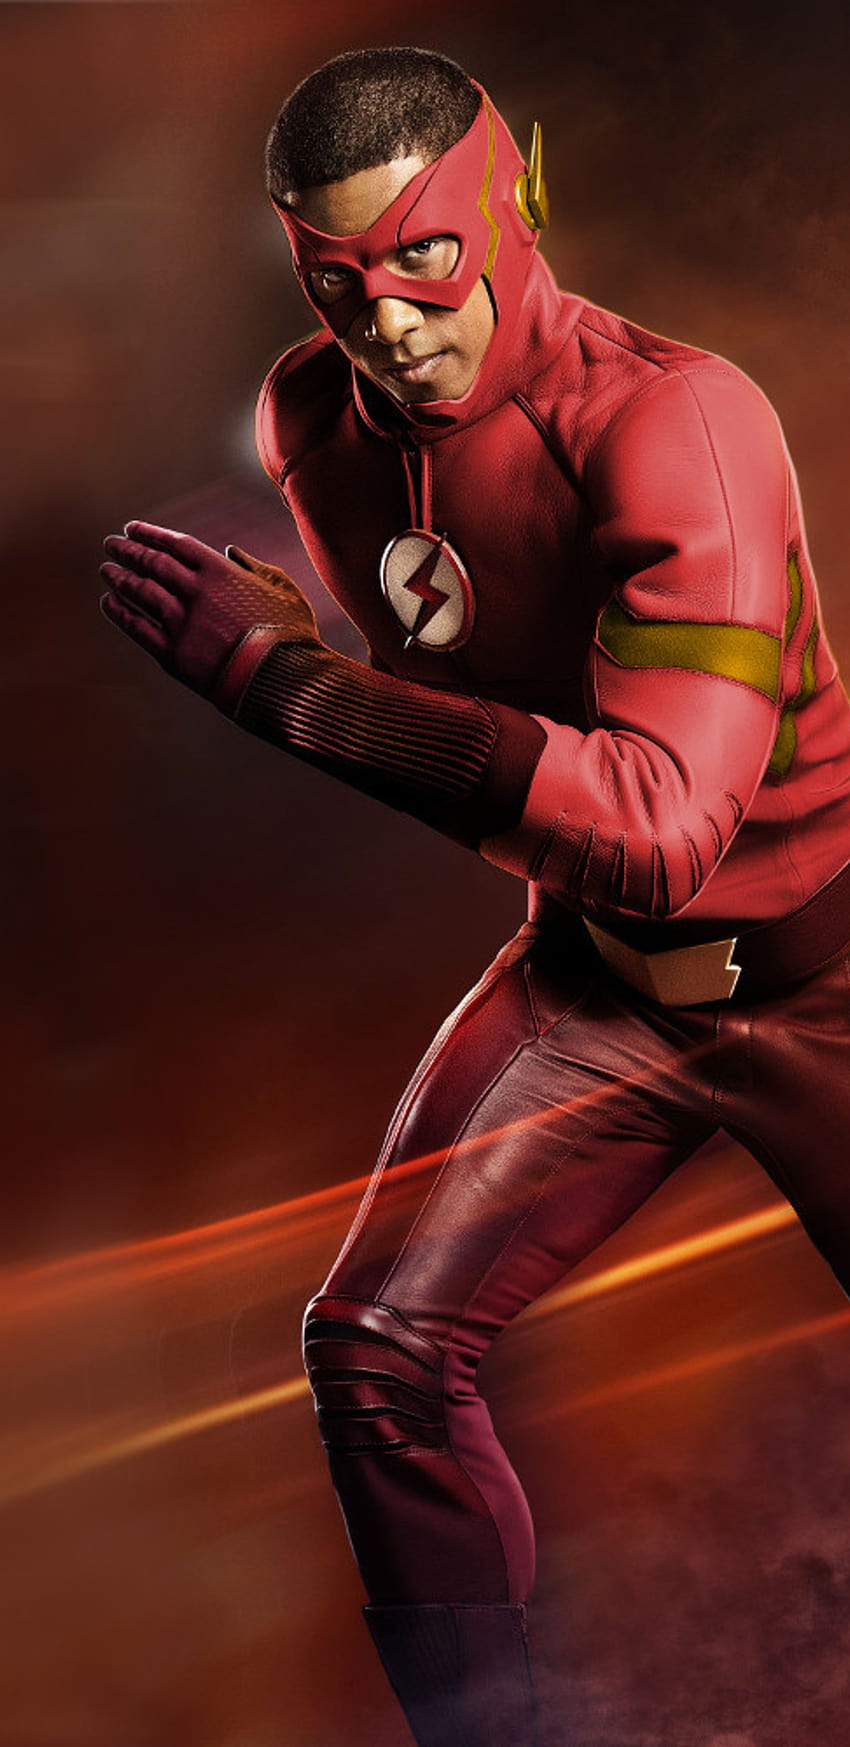 1440x2960 Wally West As The Flash Red Suit Samsung Galaxy Note 9,8, S9,S8,S Q , Backgrounds, and, the flash season 9 HD phone wallpaper